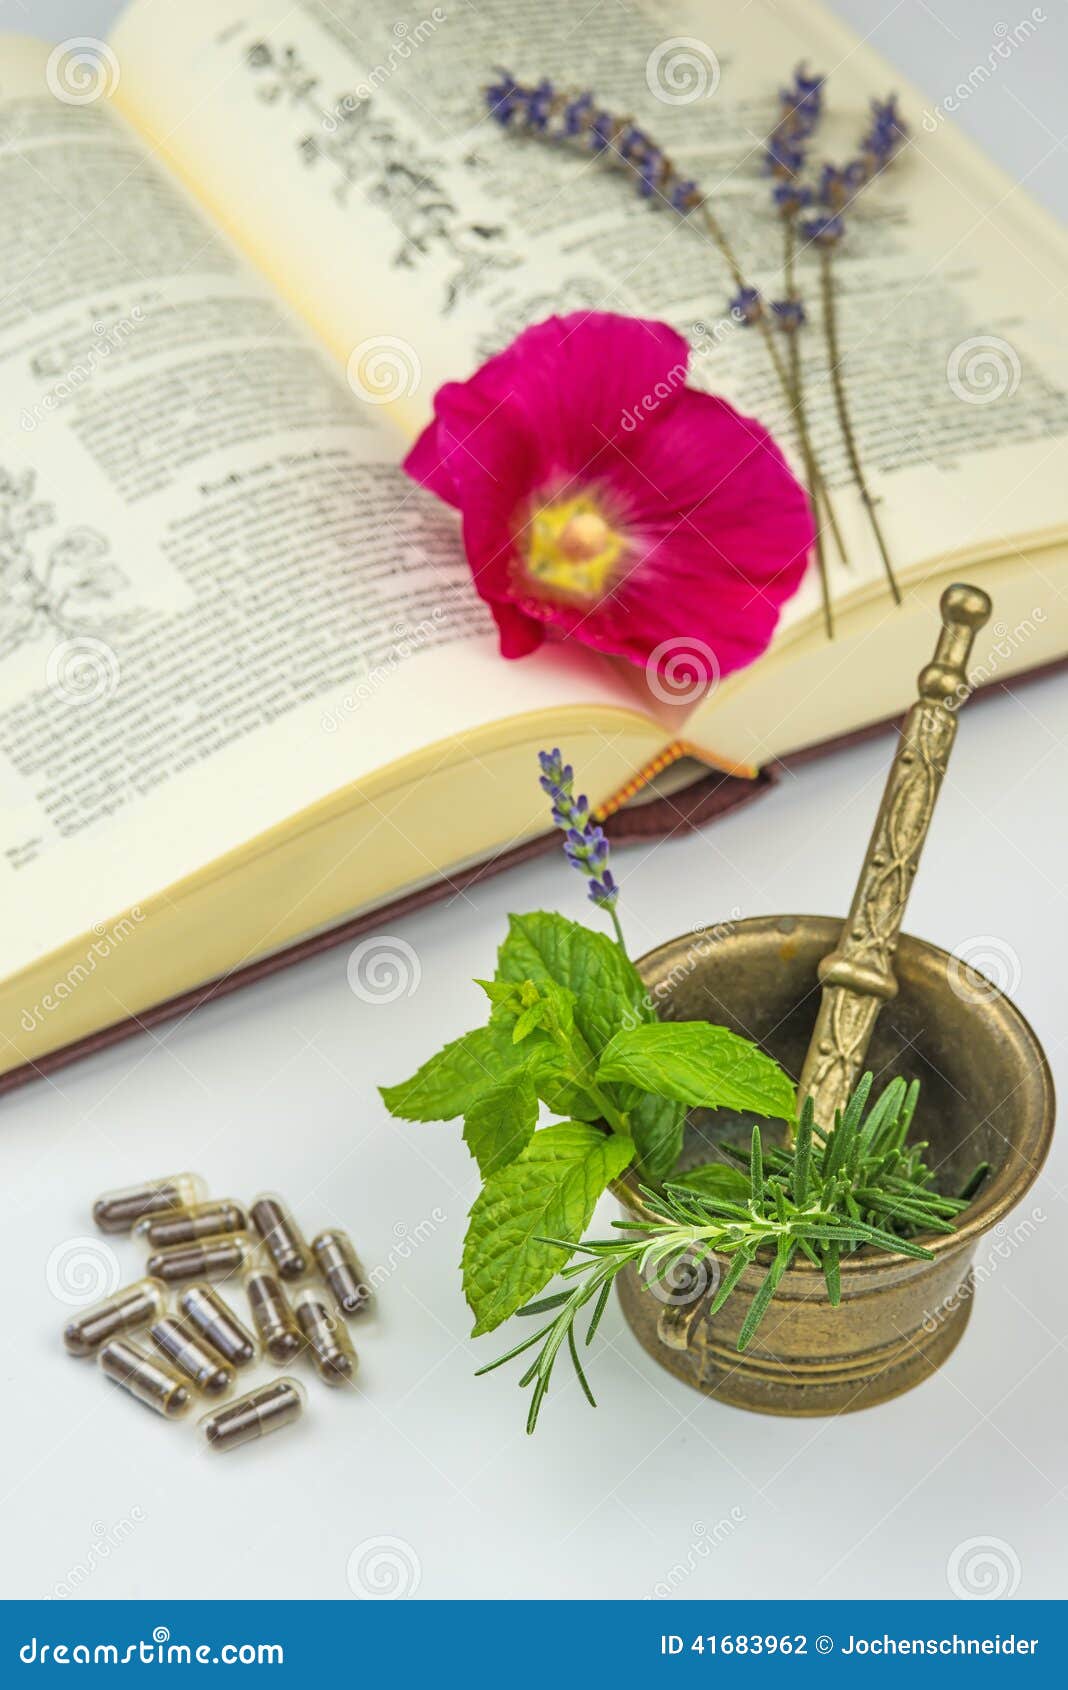 naturopathy with herbs